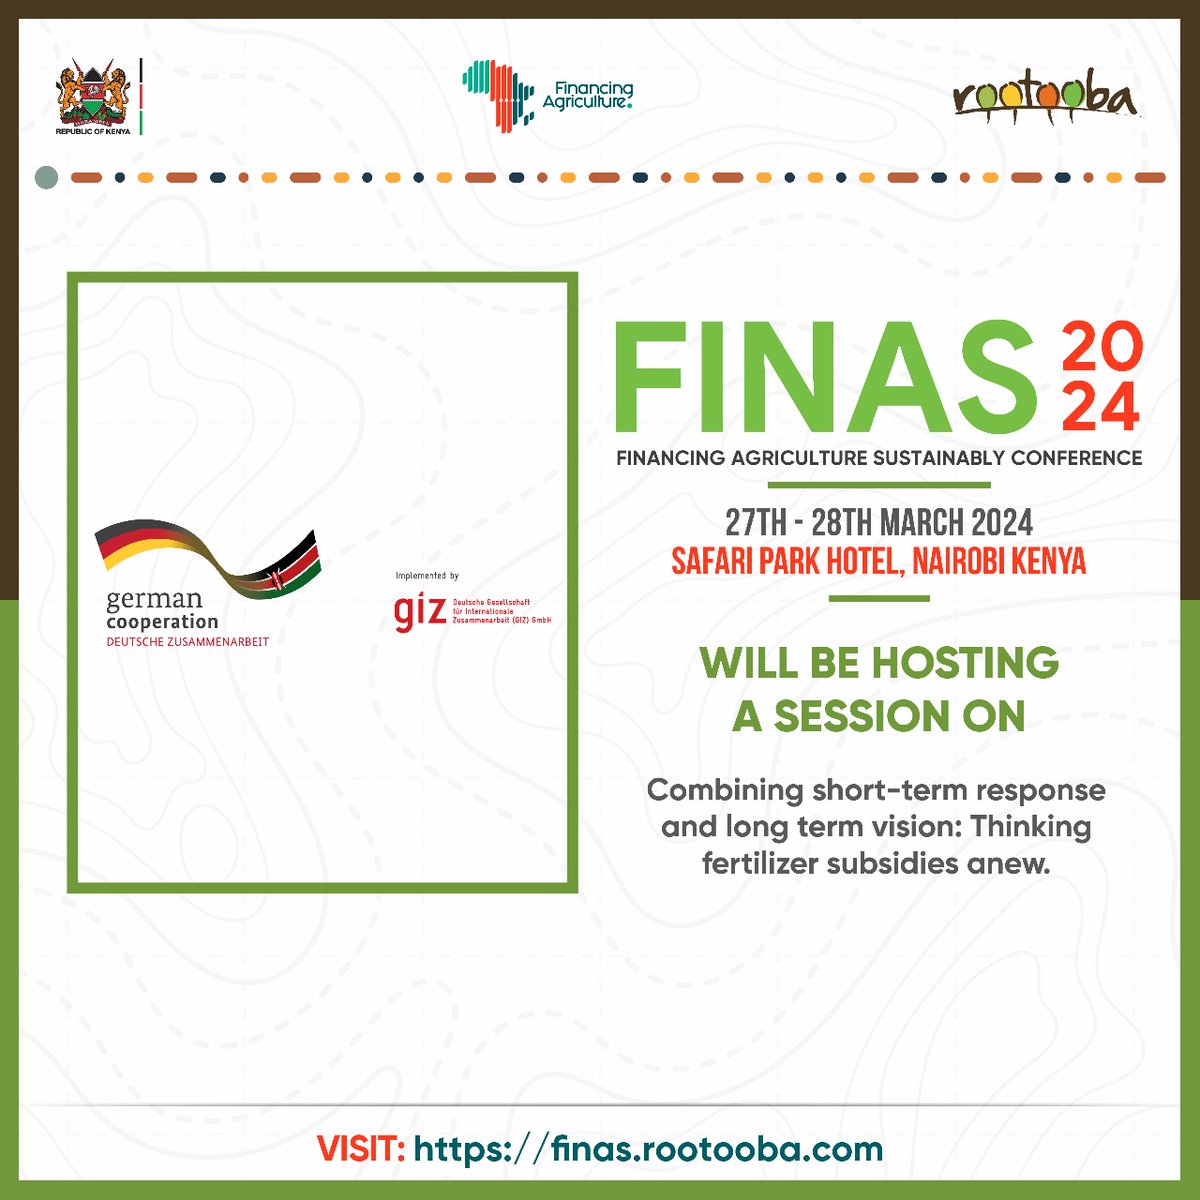 #FINAS2024 in partnership with @giz_gmbh #Financing Agriculture sustainably! Resourcing agriculture, framework for financing agriculture and digitalization of agriculture. @petermgitika @AsnetKenya @kilimoKE @rootooba @FINASAfrica.